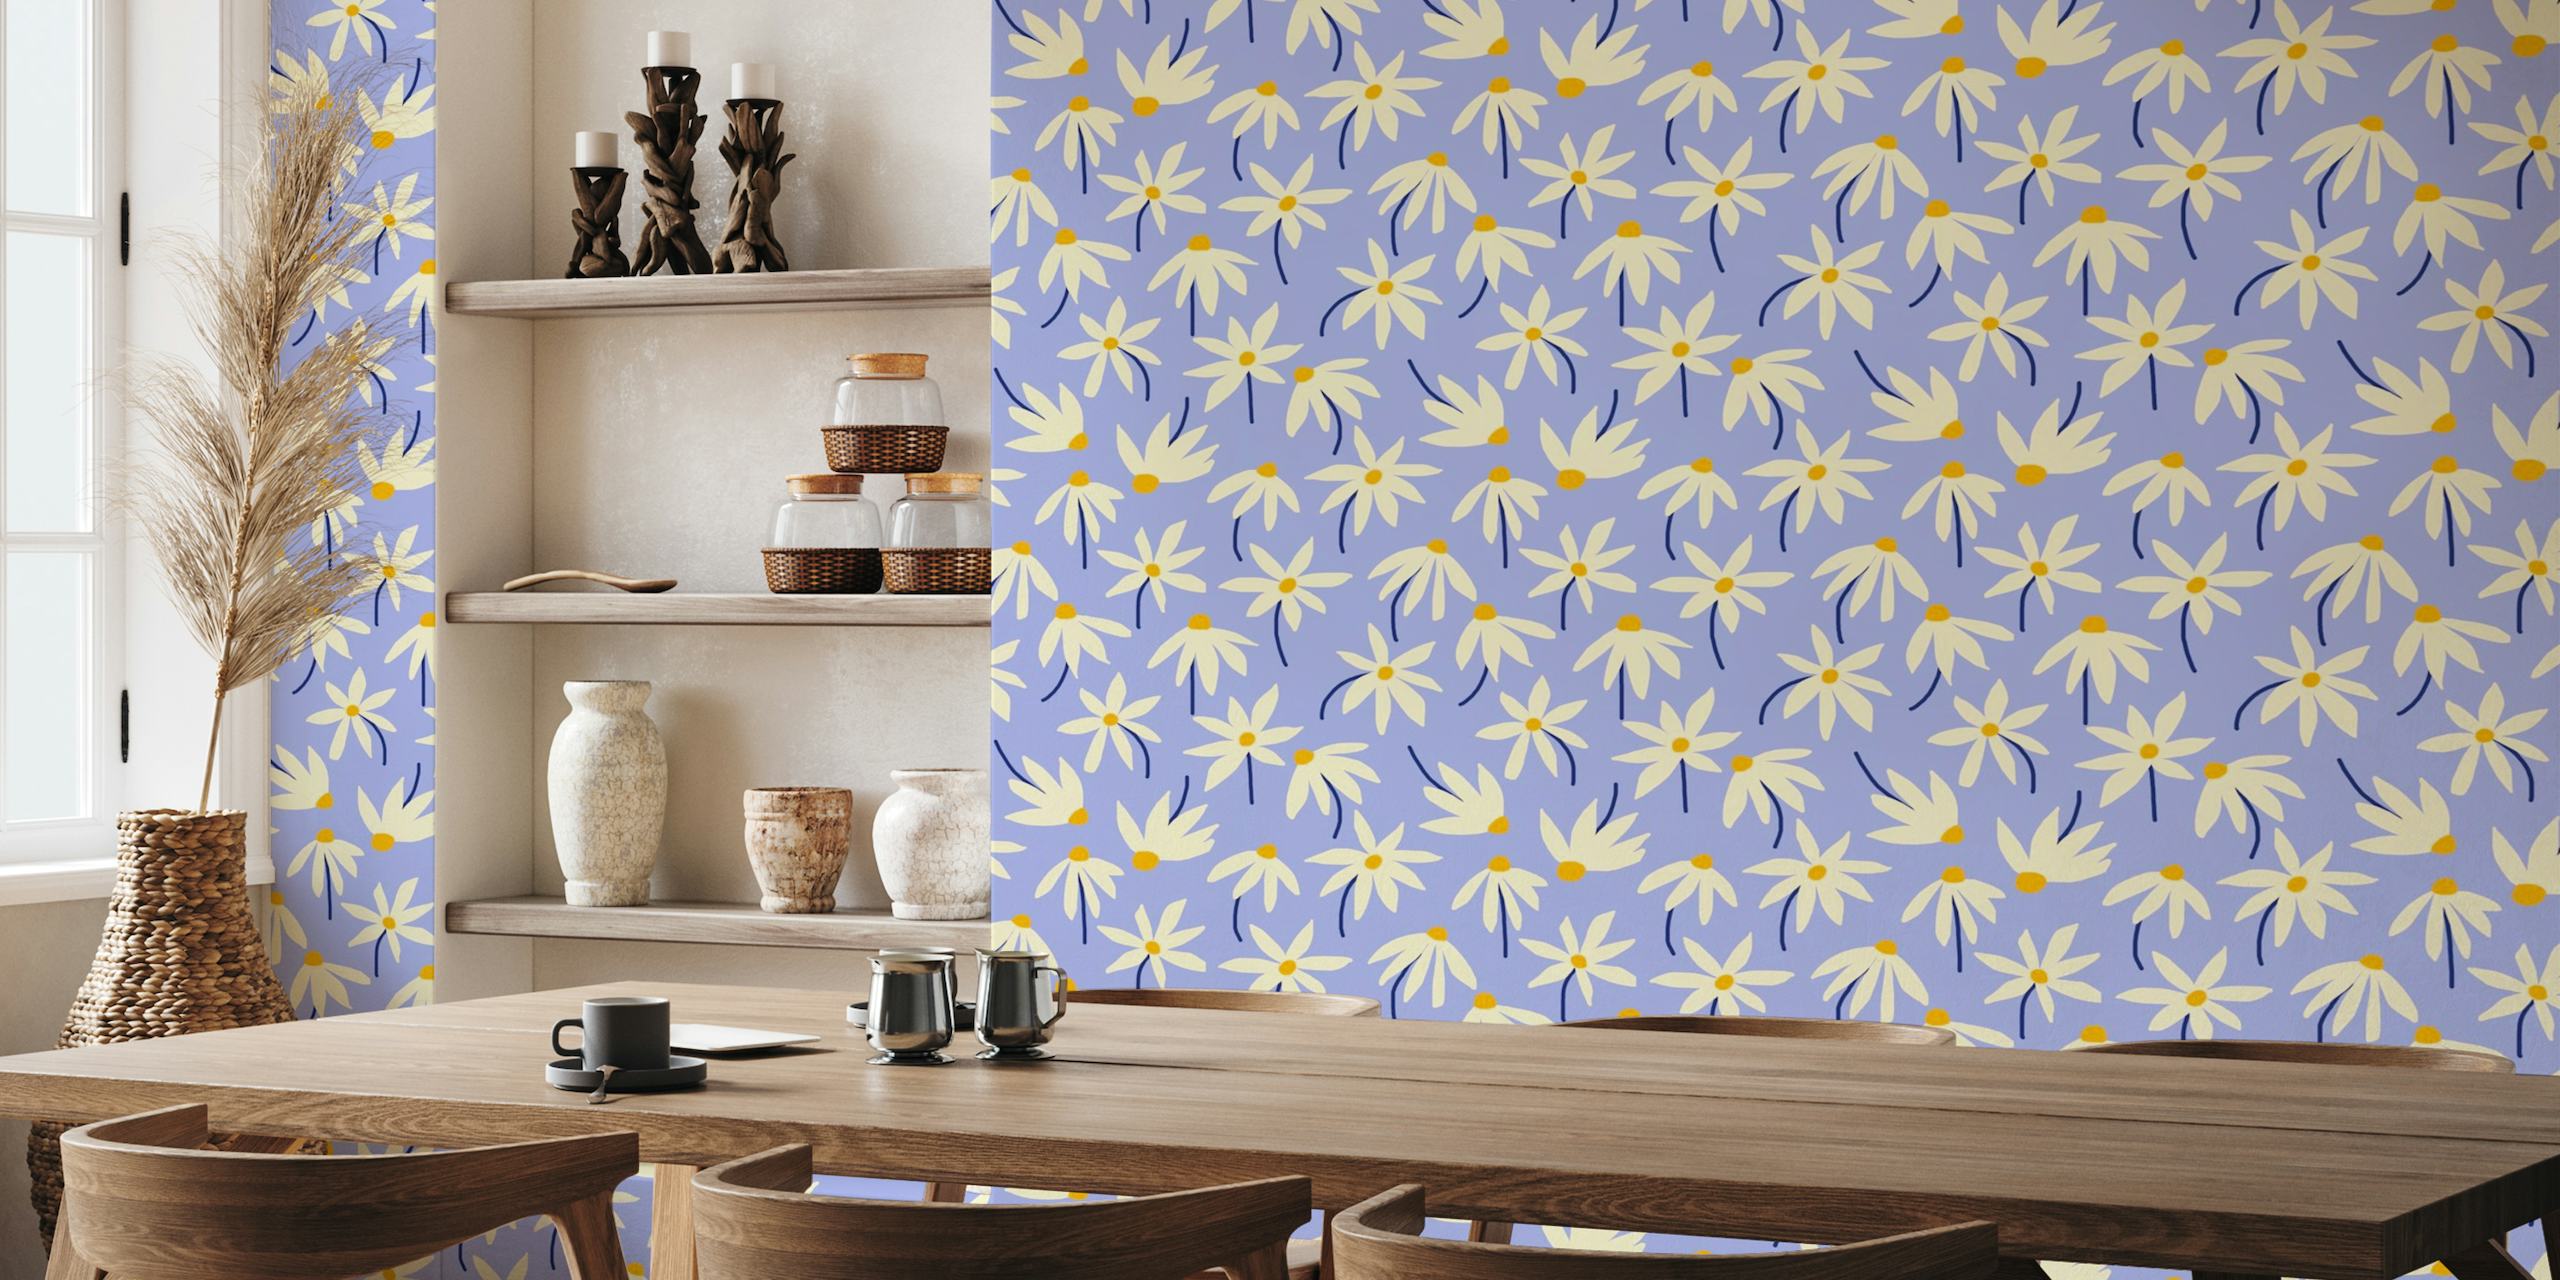 Drifting Daisies Pattern #2 - periwinkle yellow papel de parede